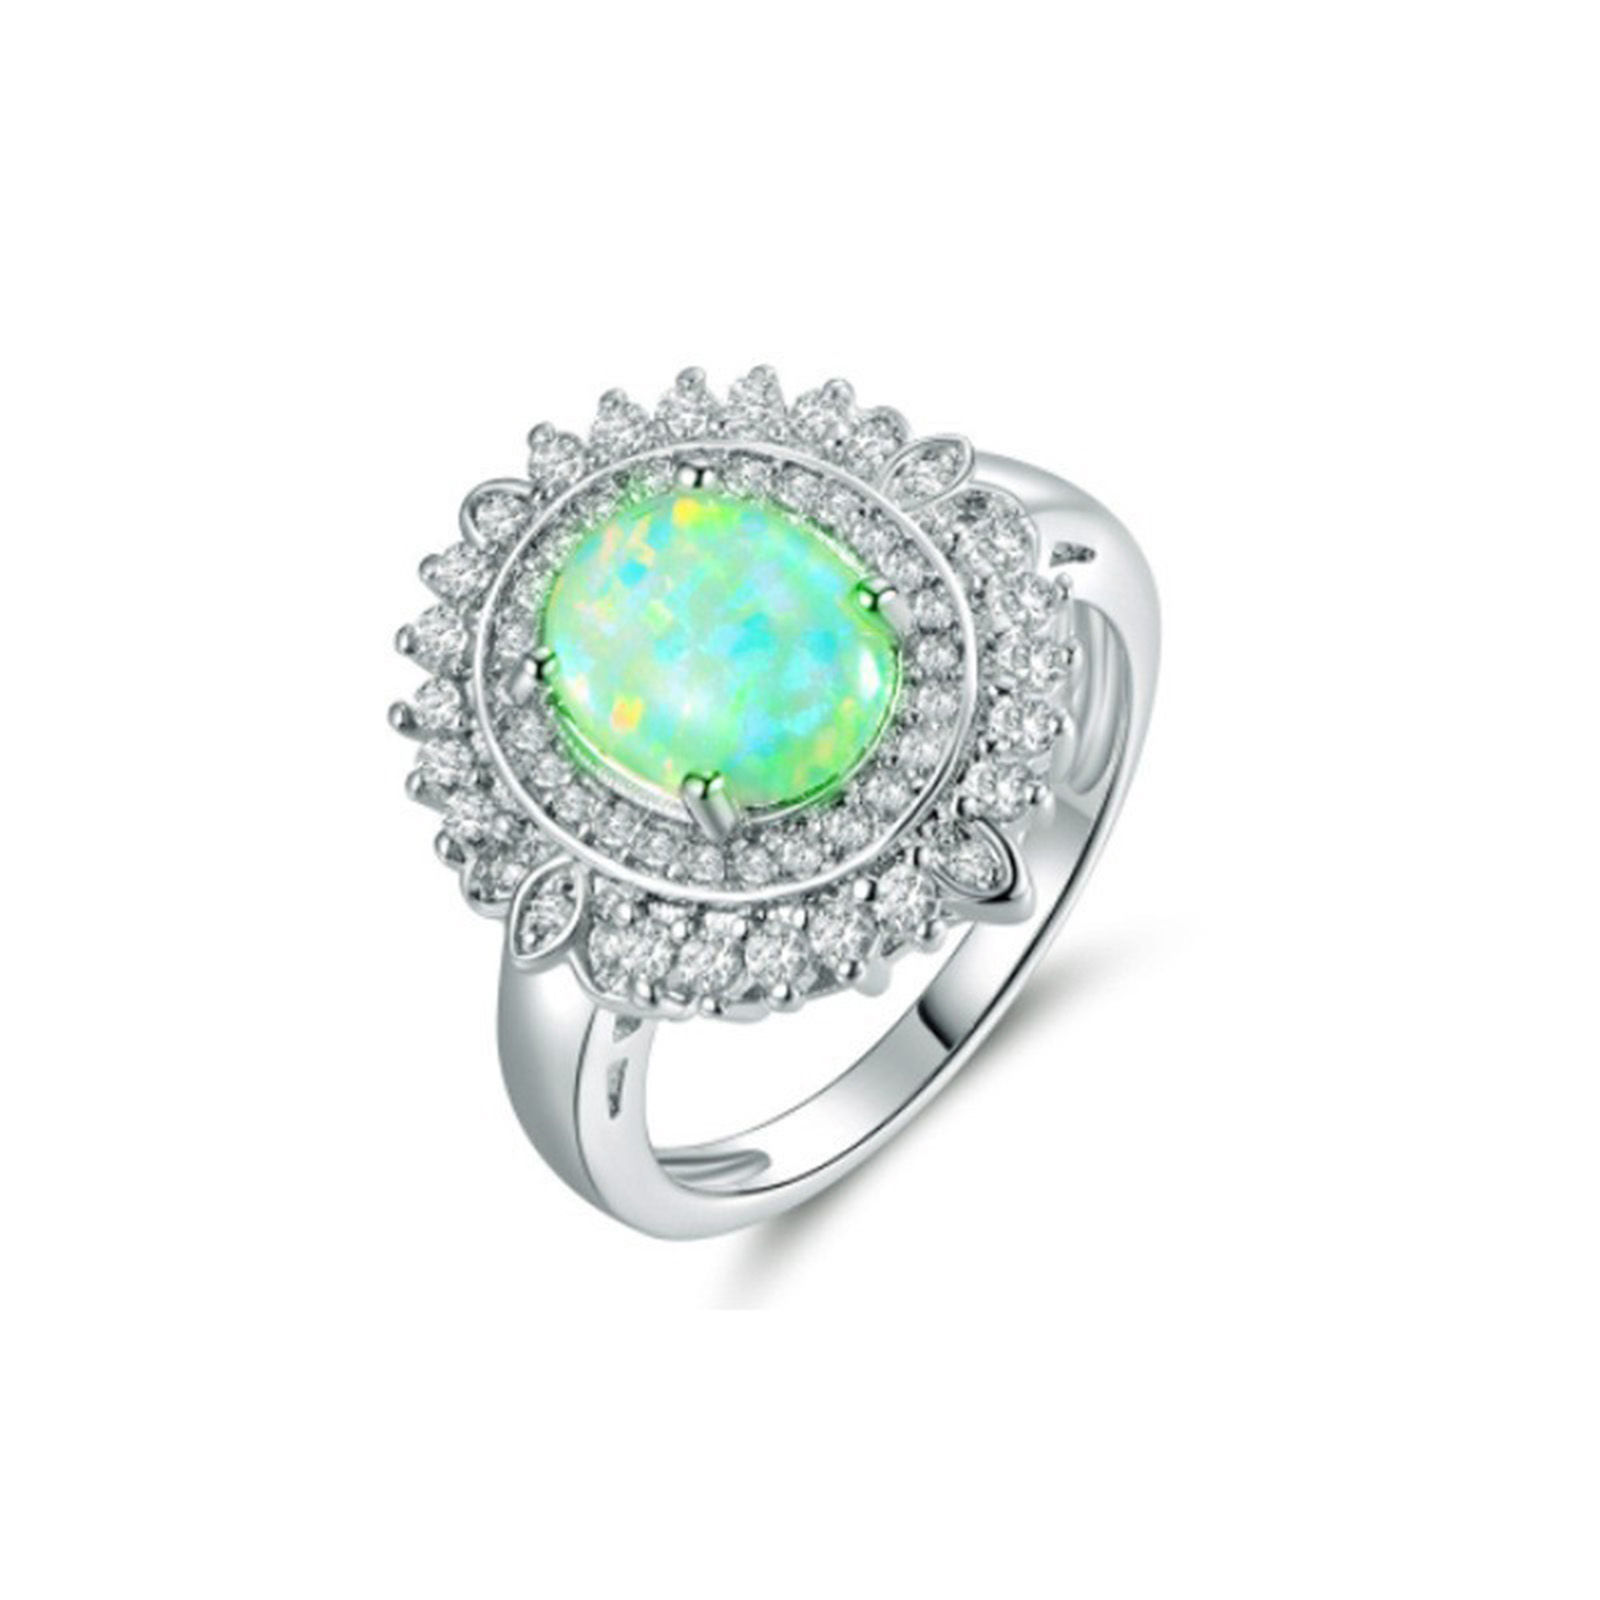 Picture of Elegant Unadjustable Rings Silver Tone Oval Clear Rhinestone Green Cubic Zirconia 17.3mm(US Size 7), 1 Piece